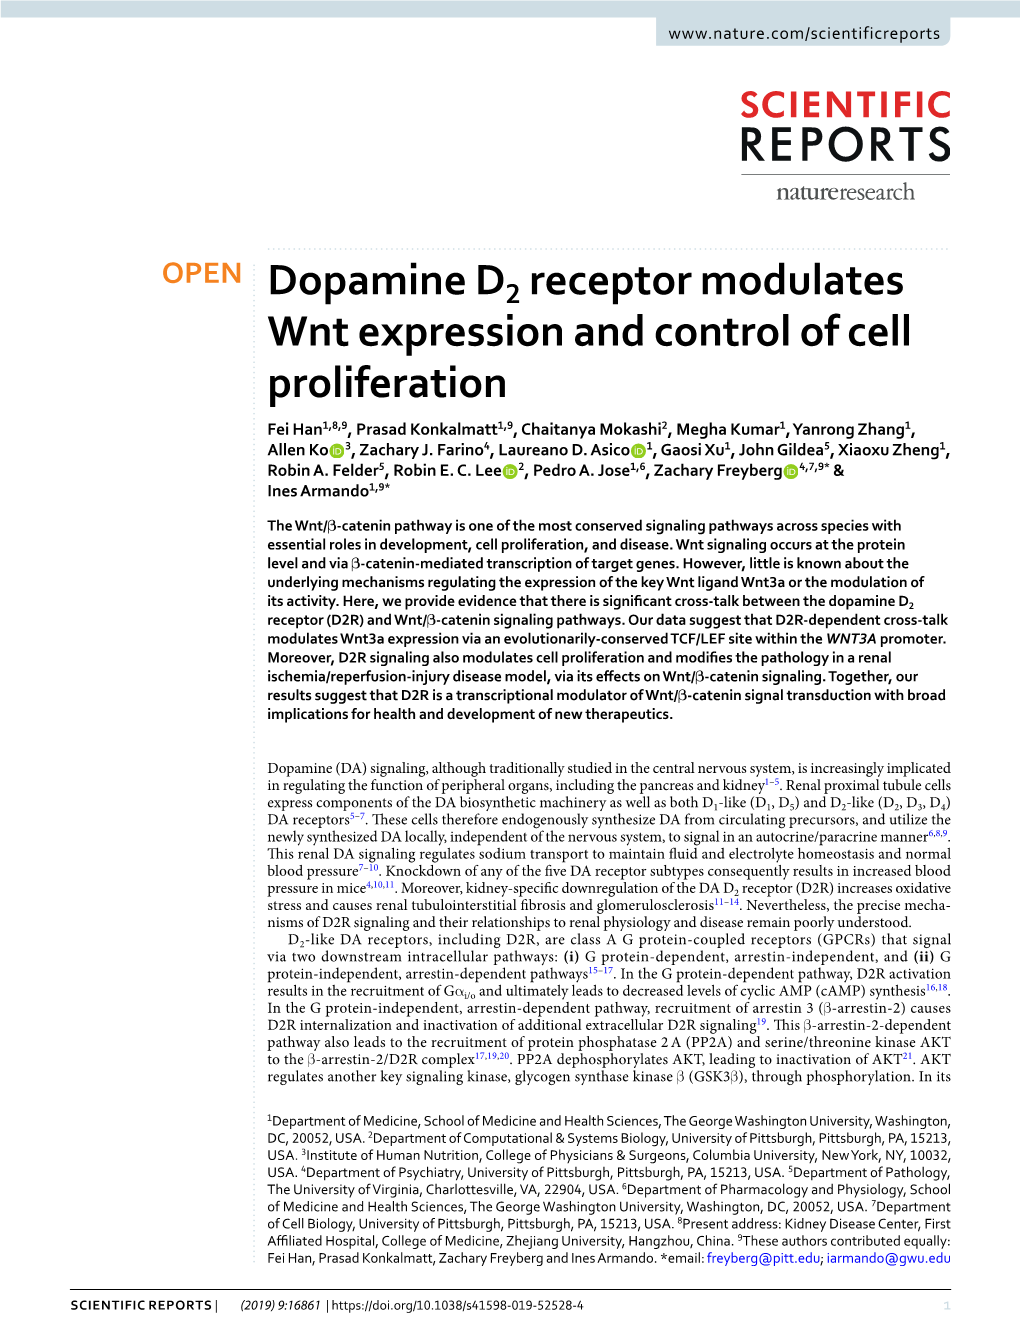 Dopamine D2 Receptor Modulates Wnt Expression and Control of Cell